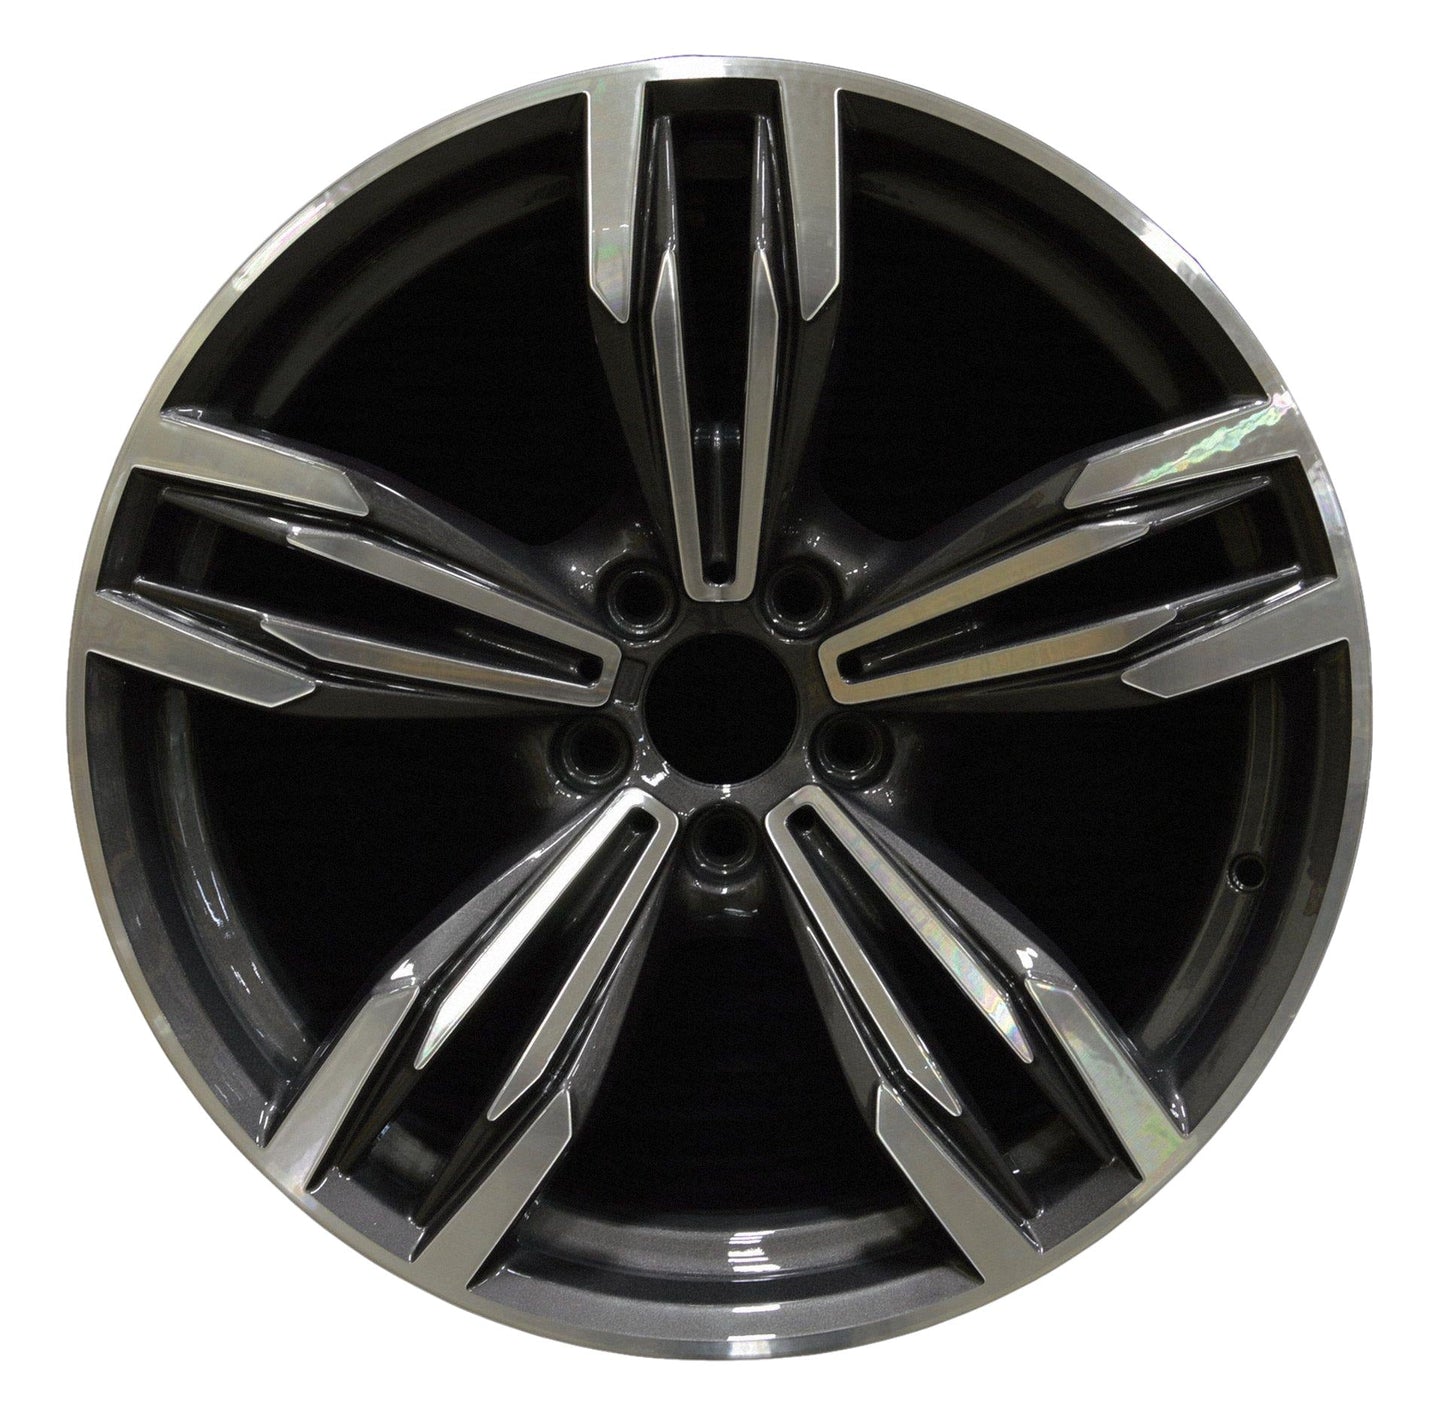 BMW M6  2012, 2013, 2014, 2015, 2016, 2017, 2018 Factory OEM Car Wheel Size 20x9.5 Alloy WAO.86026FT.LC66.MABRT